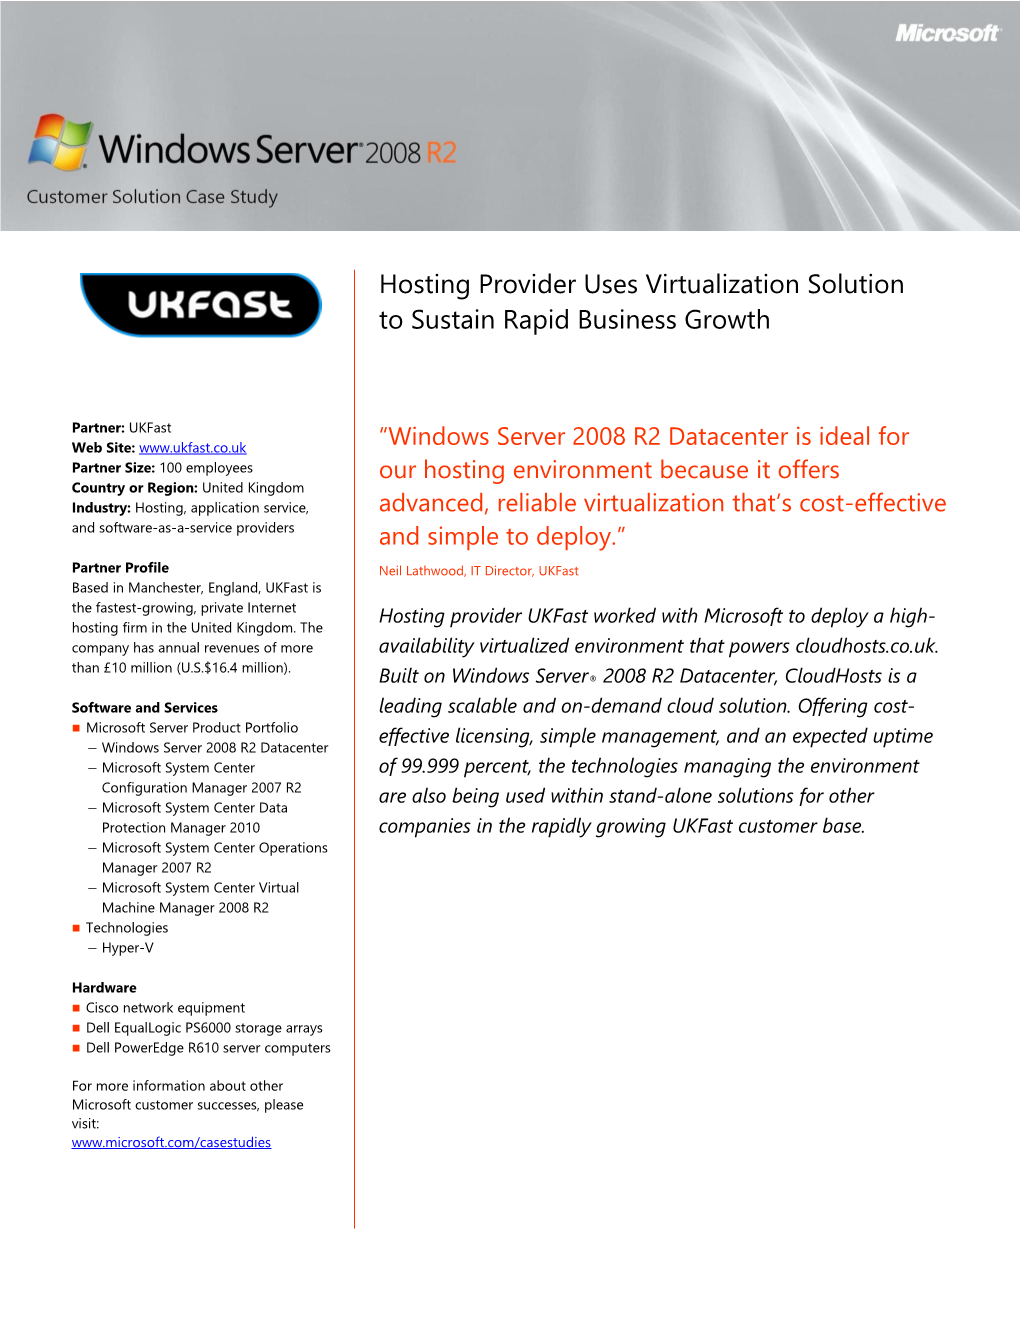 Hosting Provider Uses Virtualization Solution to Sustain Rapid Business Growth